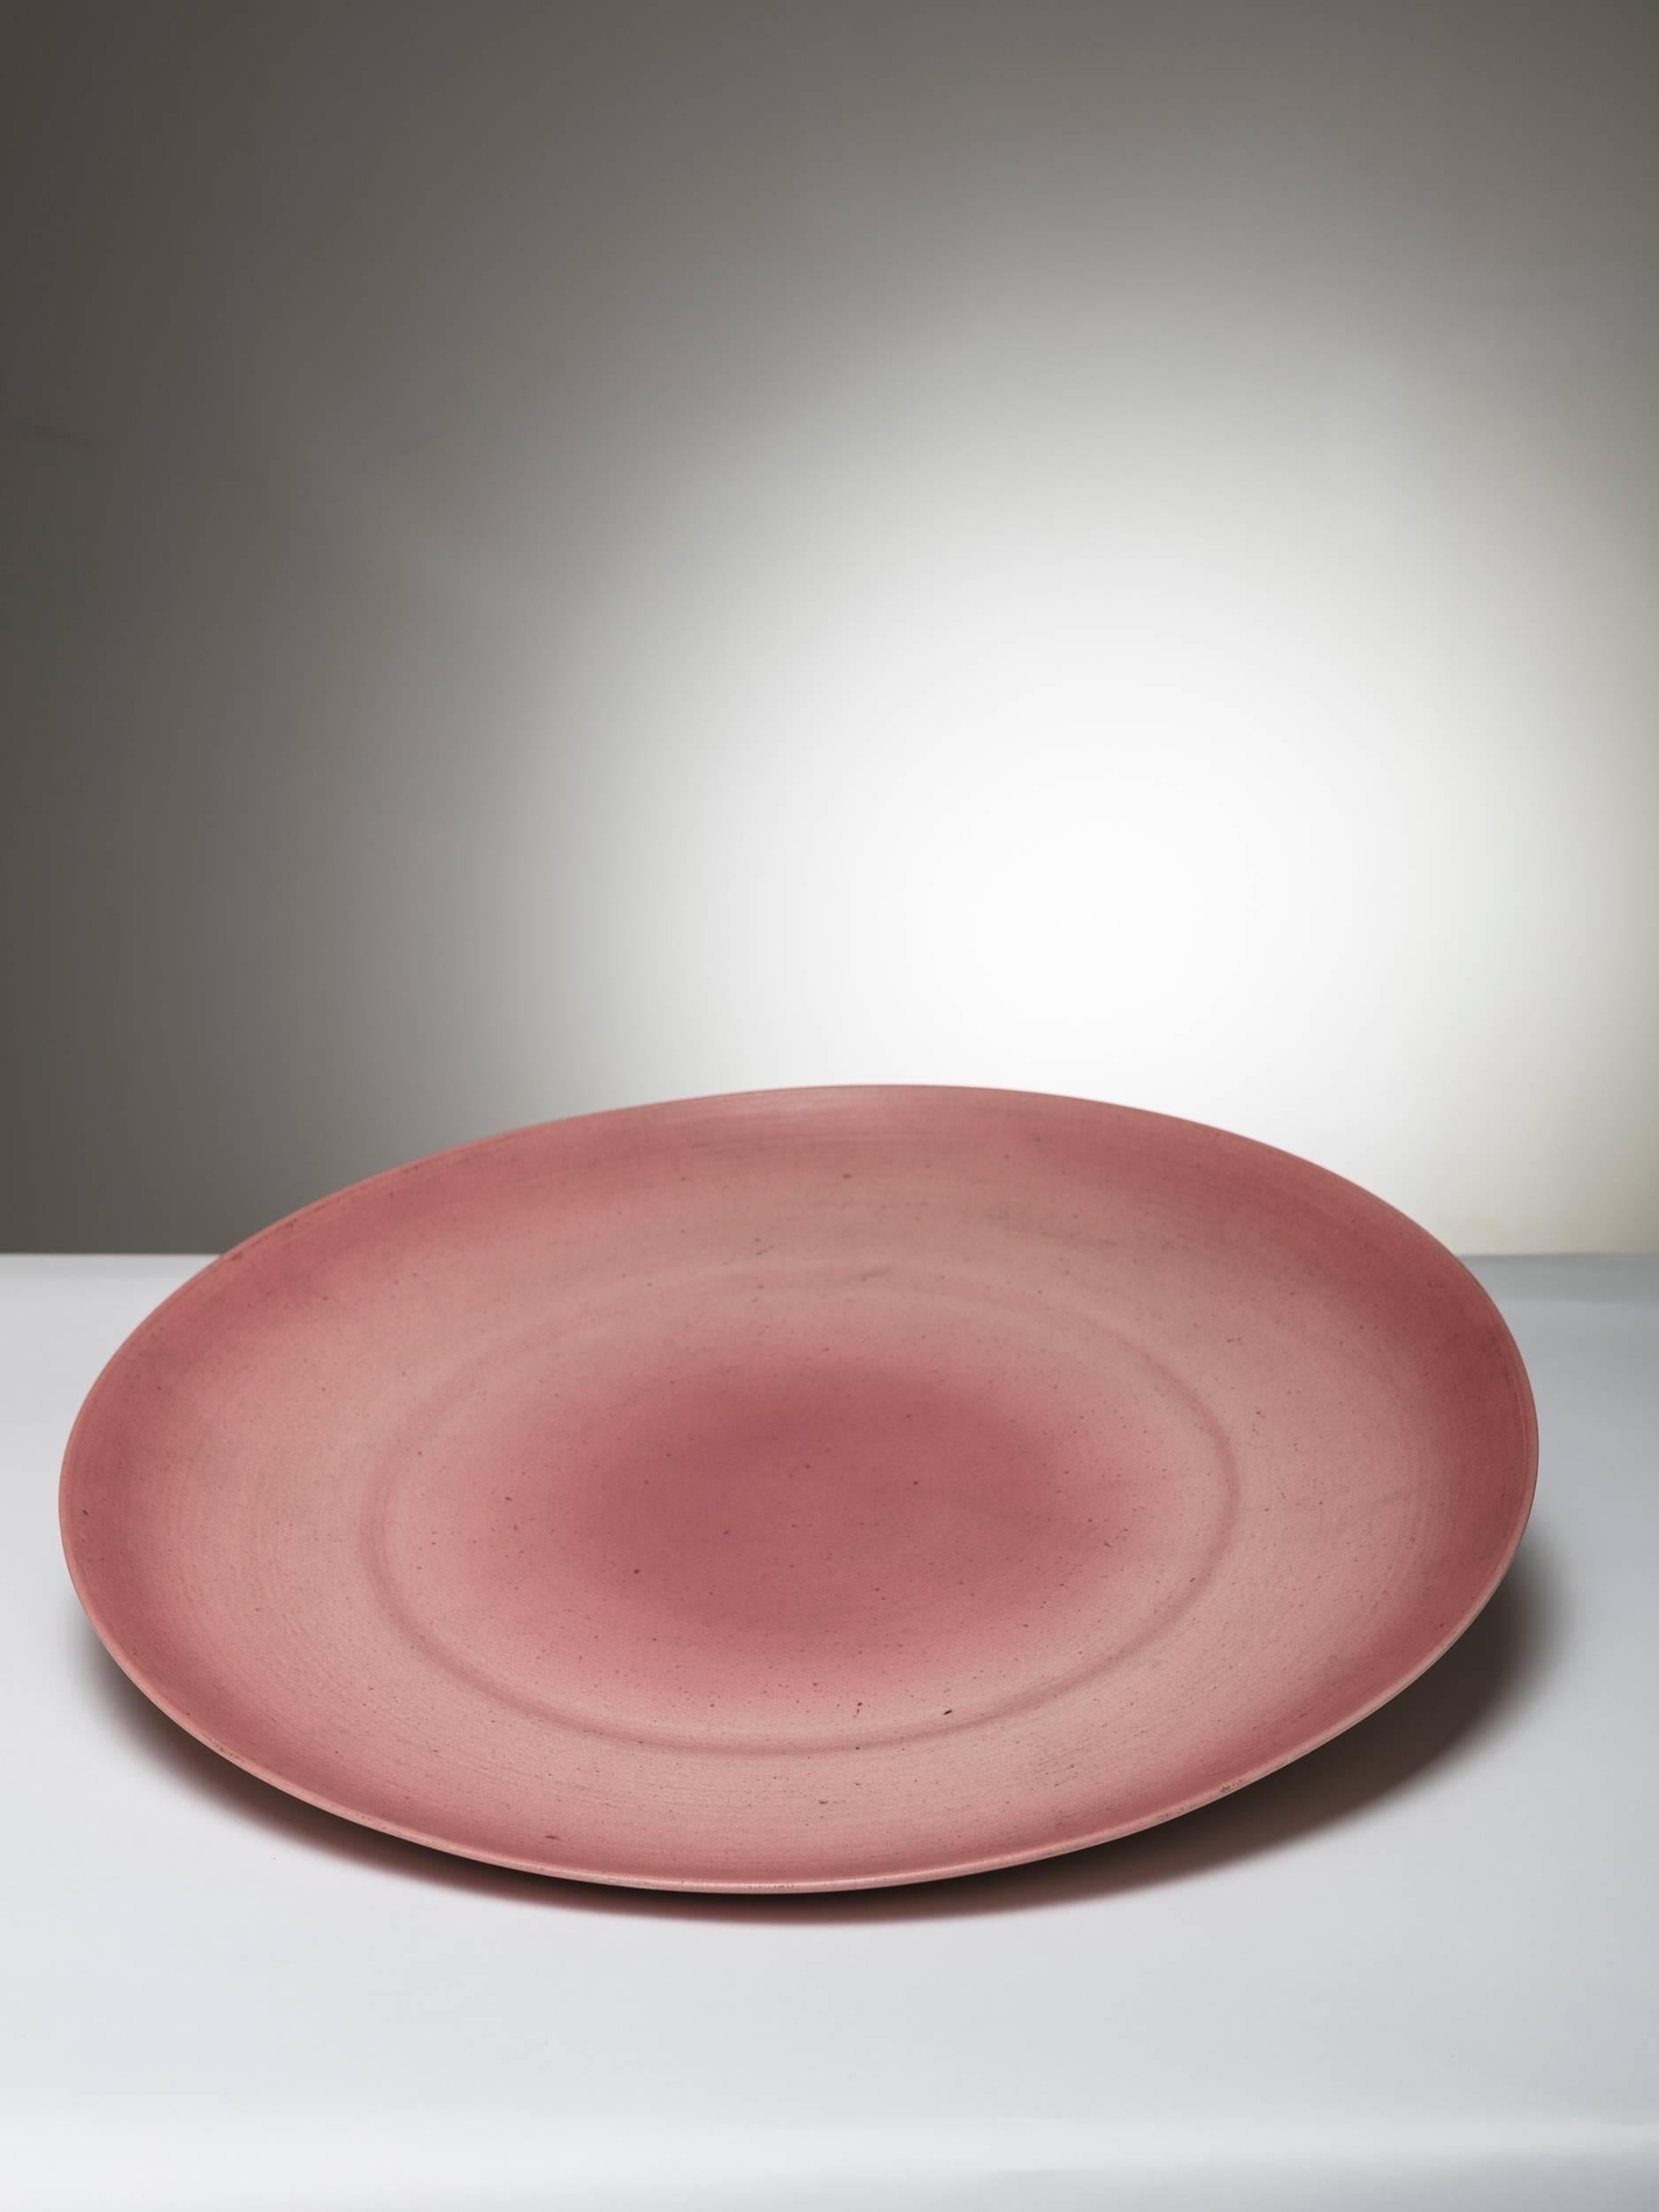 Remarkable handcrafted ceramic centrepiece by Franco Bucci for Laboratorio Pesaro.
Large and very thin piece with delicate pink surface finish.